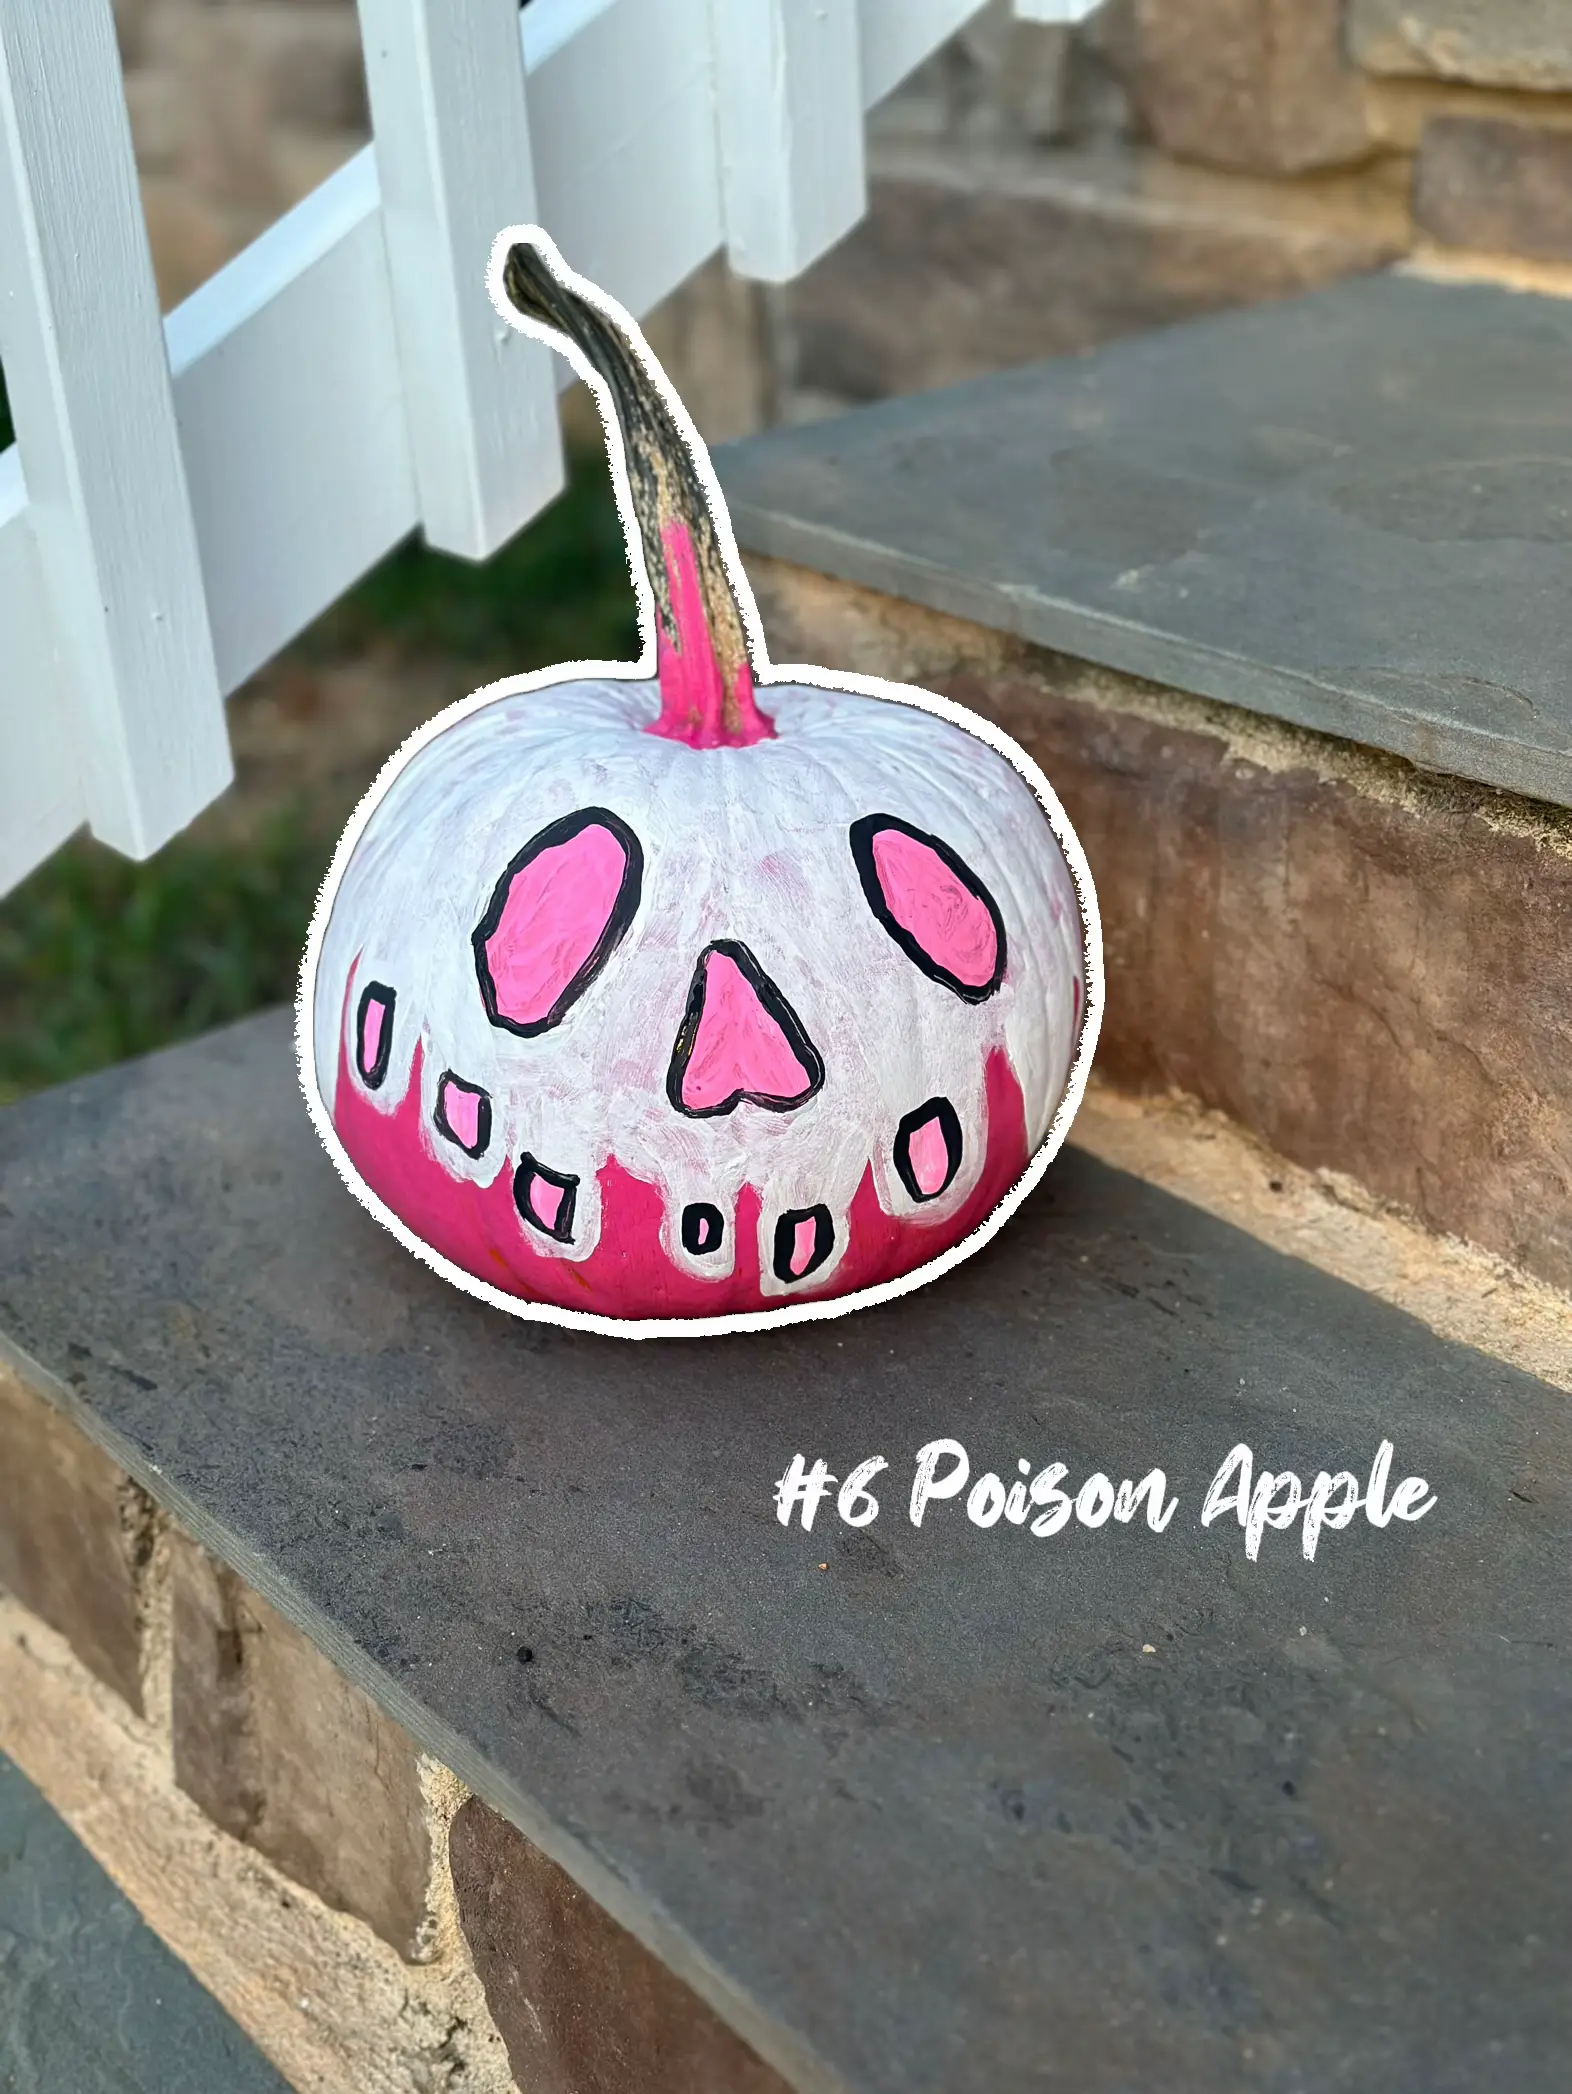 🎃Painting pumpkin idea🎃, Gallery posted by I_wanna_know_10